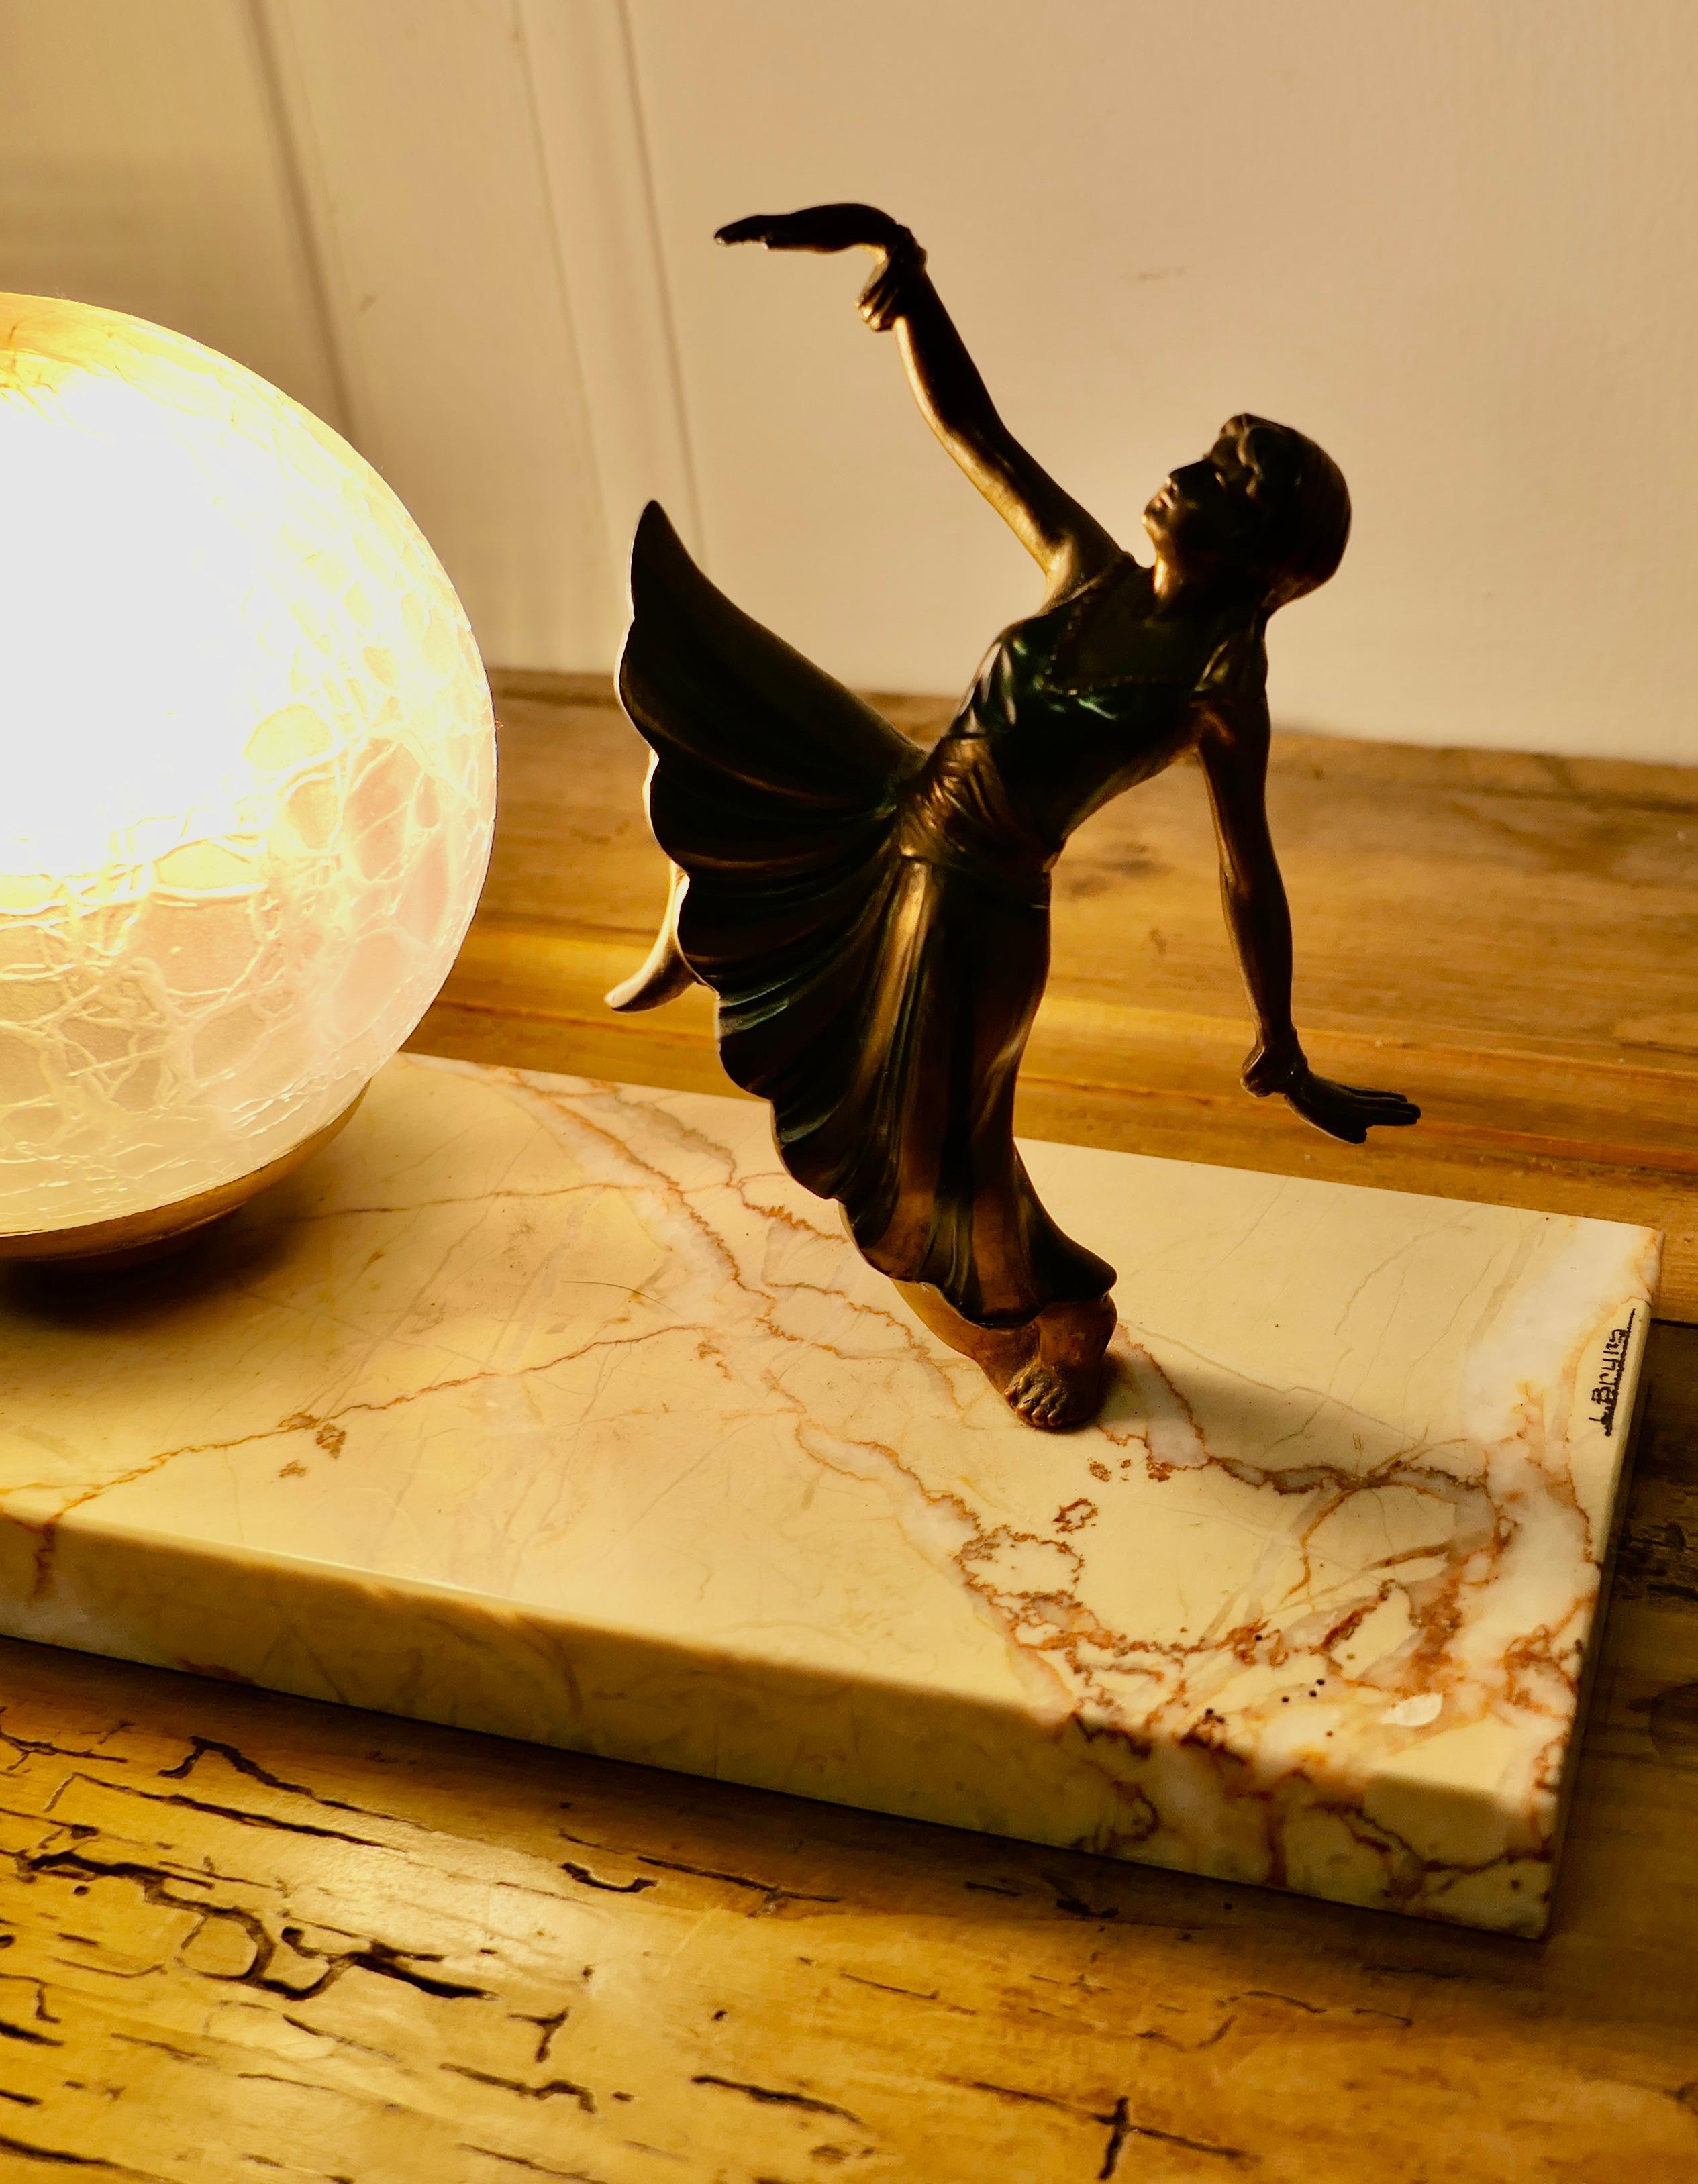 French Art Deco Table Lamp, signed L.Bryrs

The lamp is set on a marble base, the dancer is painted on iron
The lamp is in generally good condition and the lampshade is original
There is a signature on the marble base
All the wiring is good, the